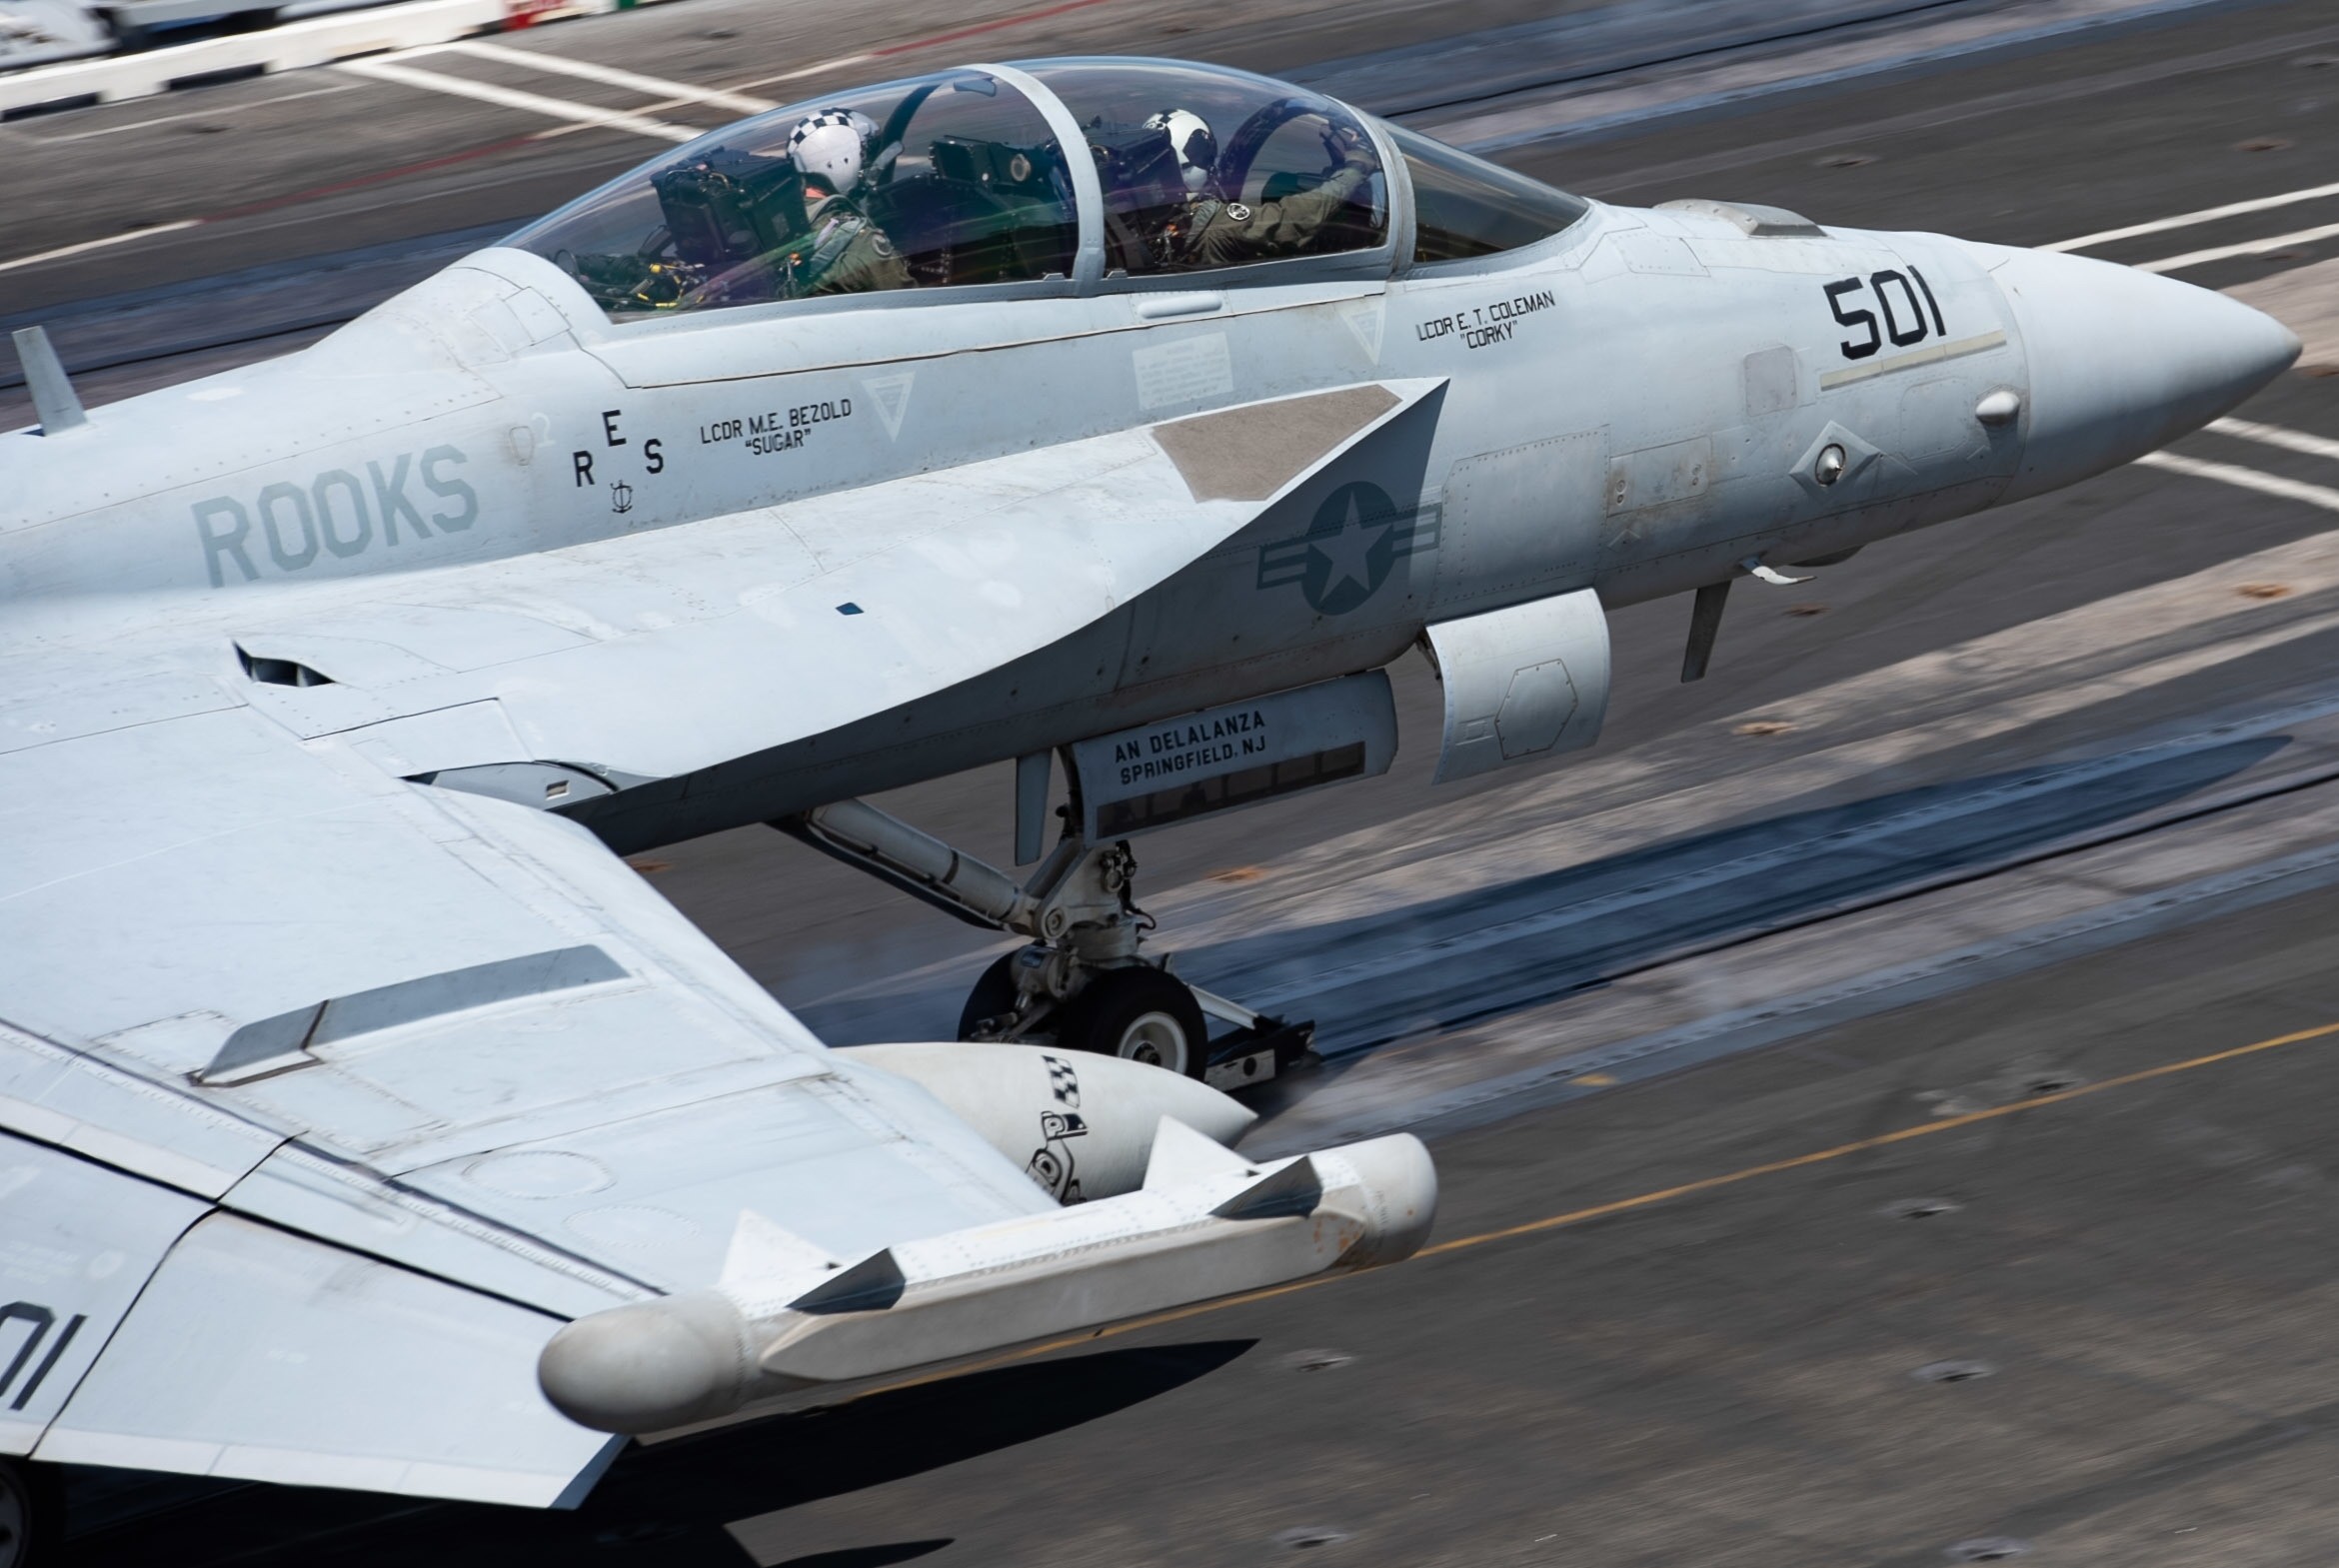 vaq-137 rooks electronic attack squadron us navy ea-18g growler carrier air wing cvw-1 uss harry s. truman cvn-75 92